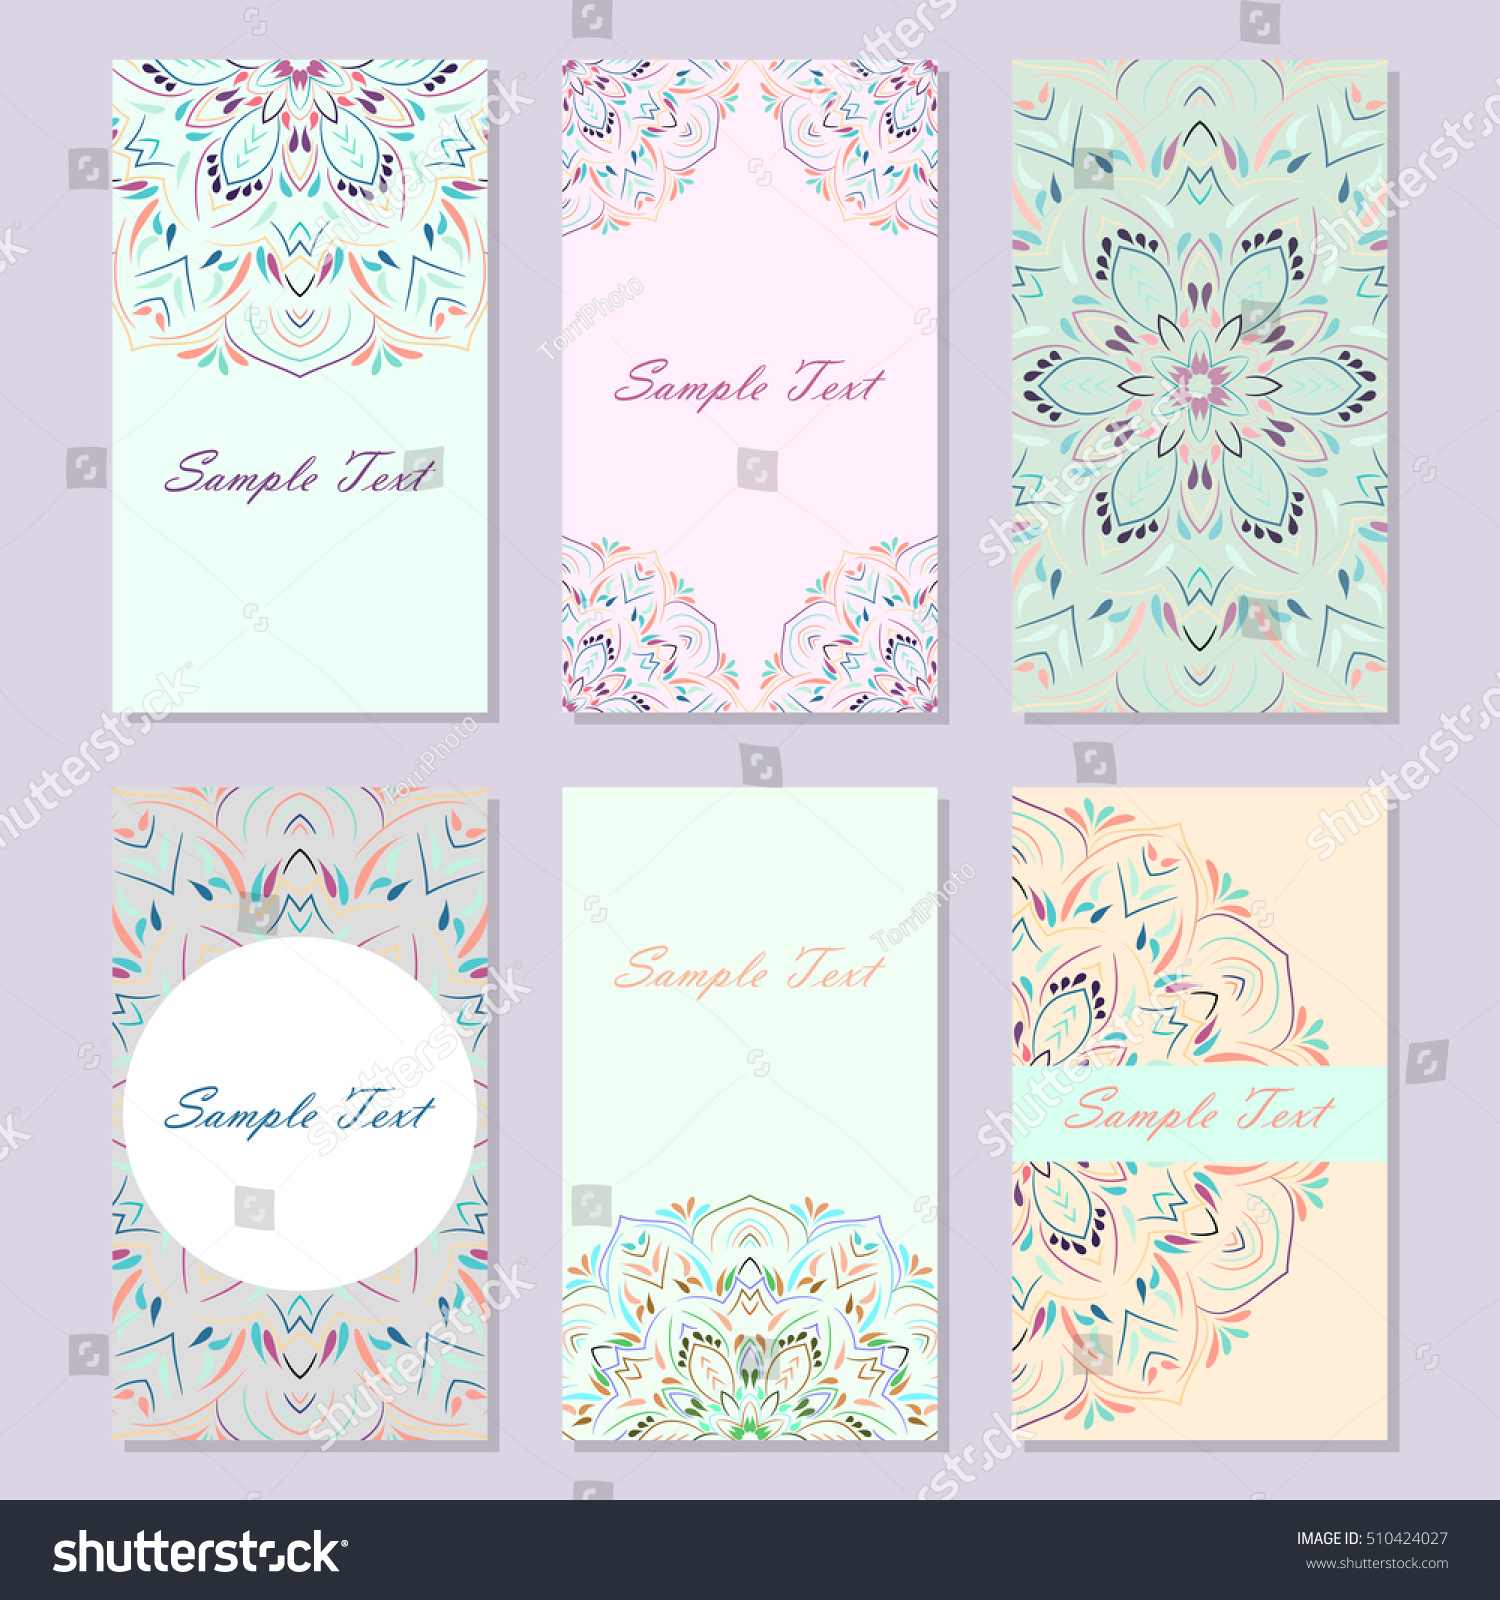 https://www.shutterstock.com/pic-510424027/stock-vector-set-of-elegance-pastel-colored-business-card-or-invitation-templates-with-abstract-floral-design-vector-illustration-eps-8.html